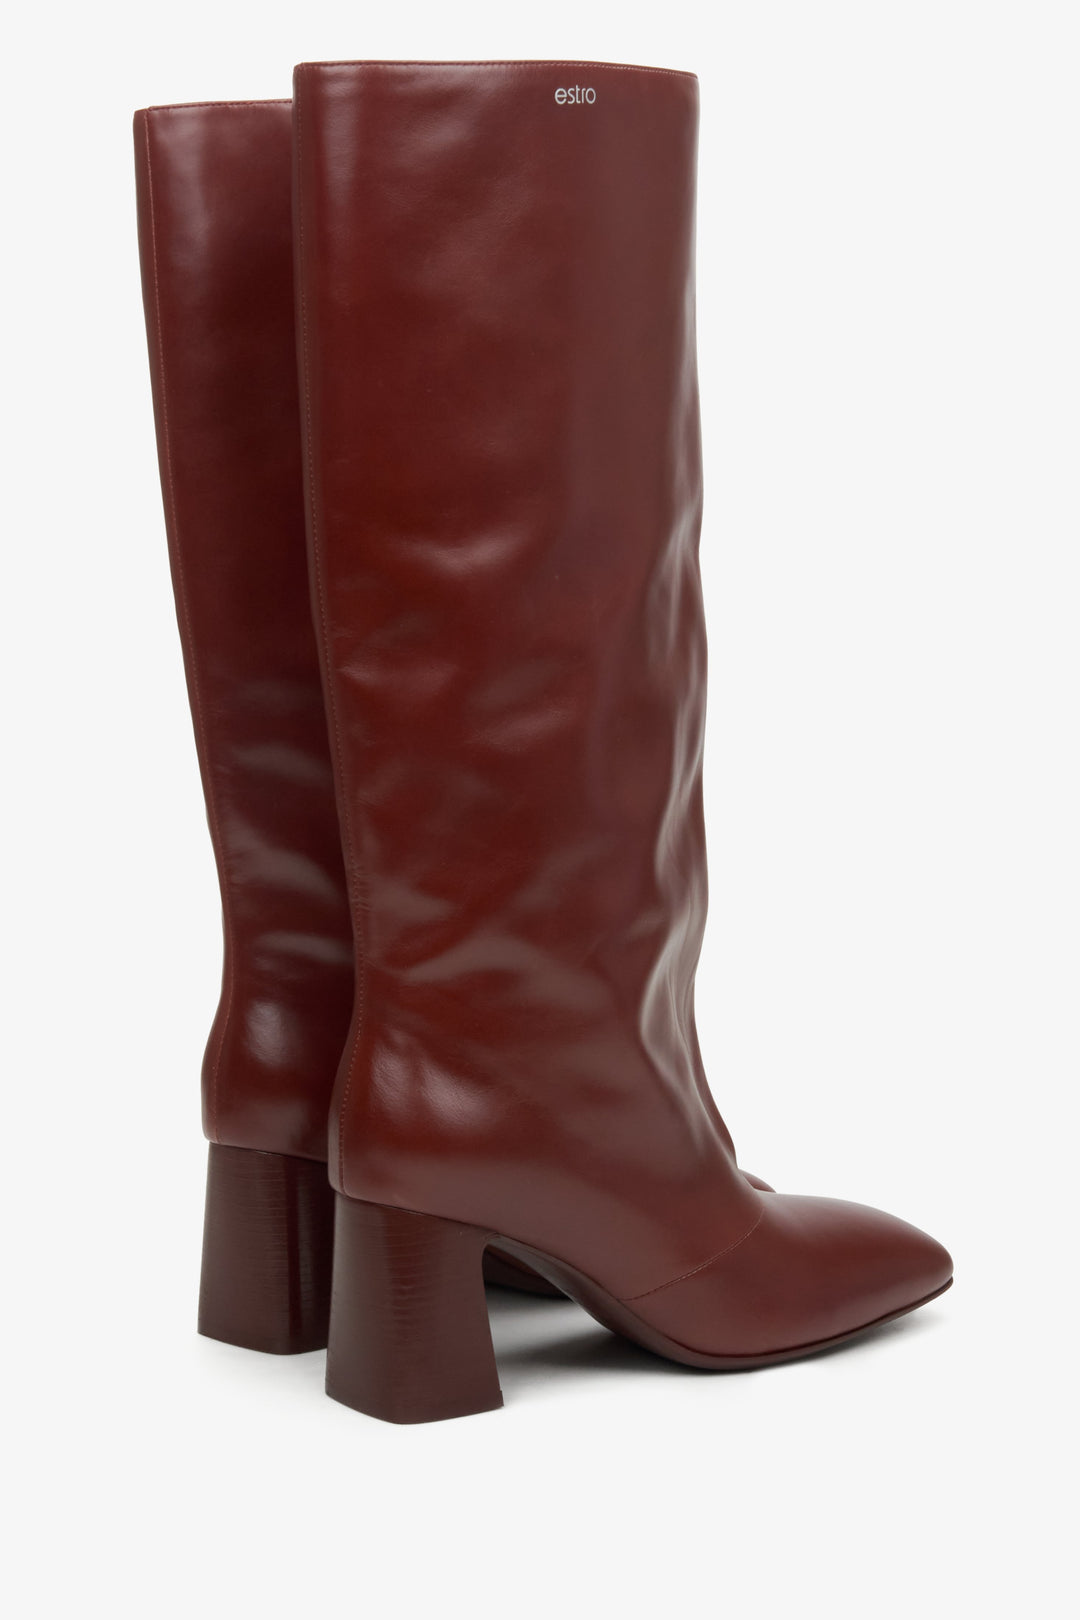 Women's oversized shaft genuine leather high boots in burgundy.